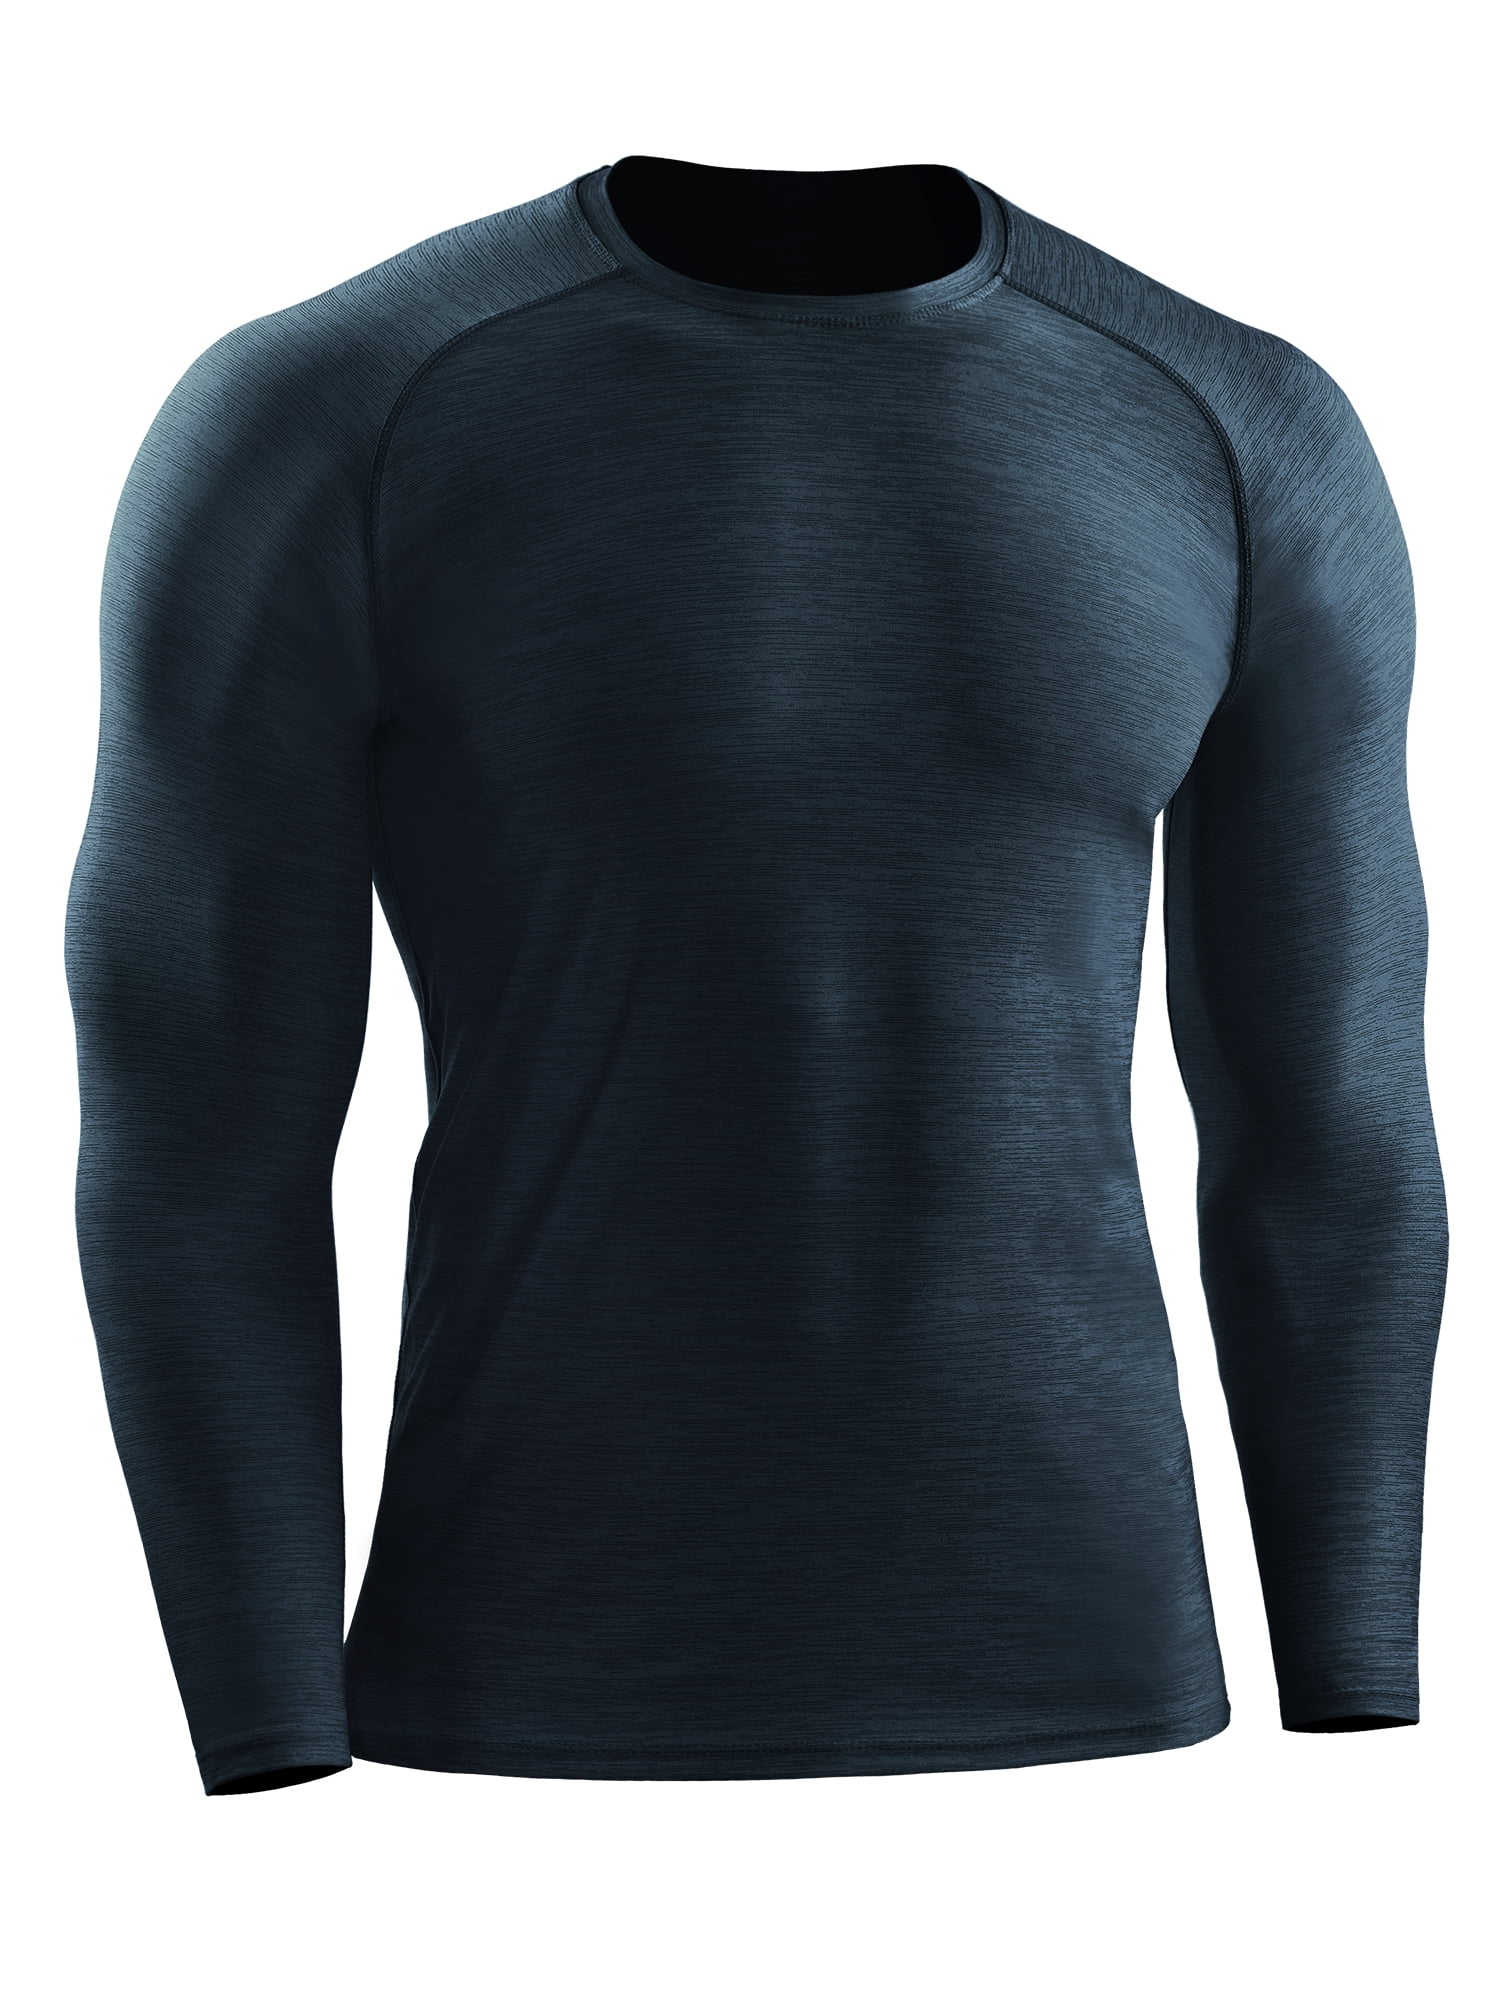 Mens Compression Tops Athletic Running Training Gym T-shirts Slim fit Base Layer 